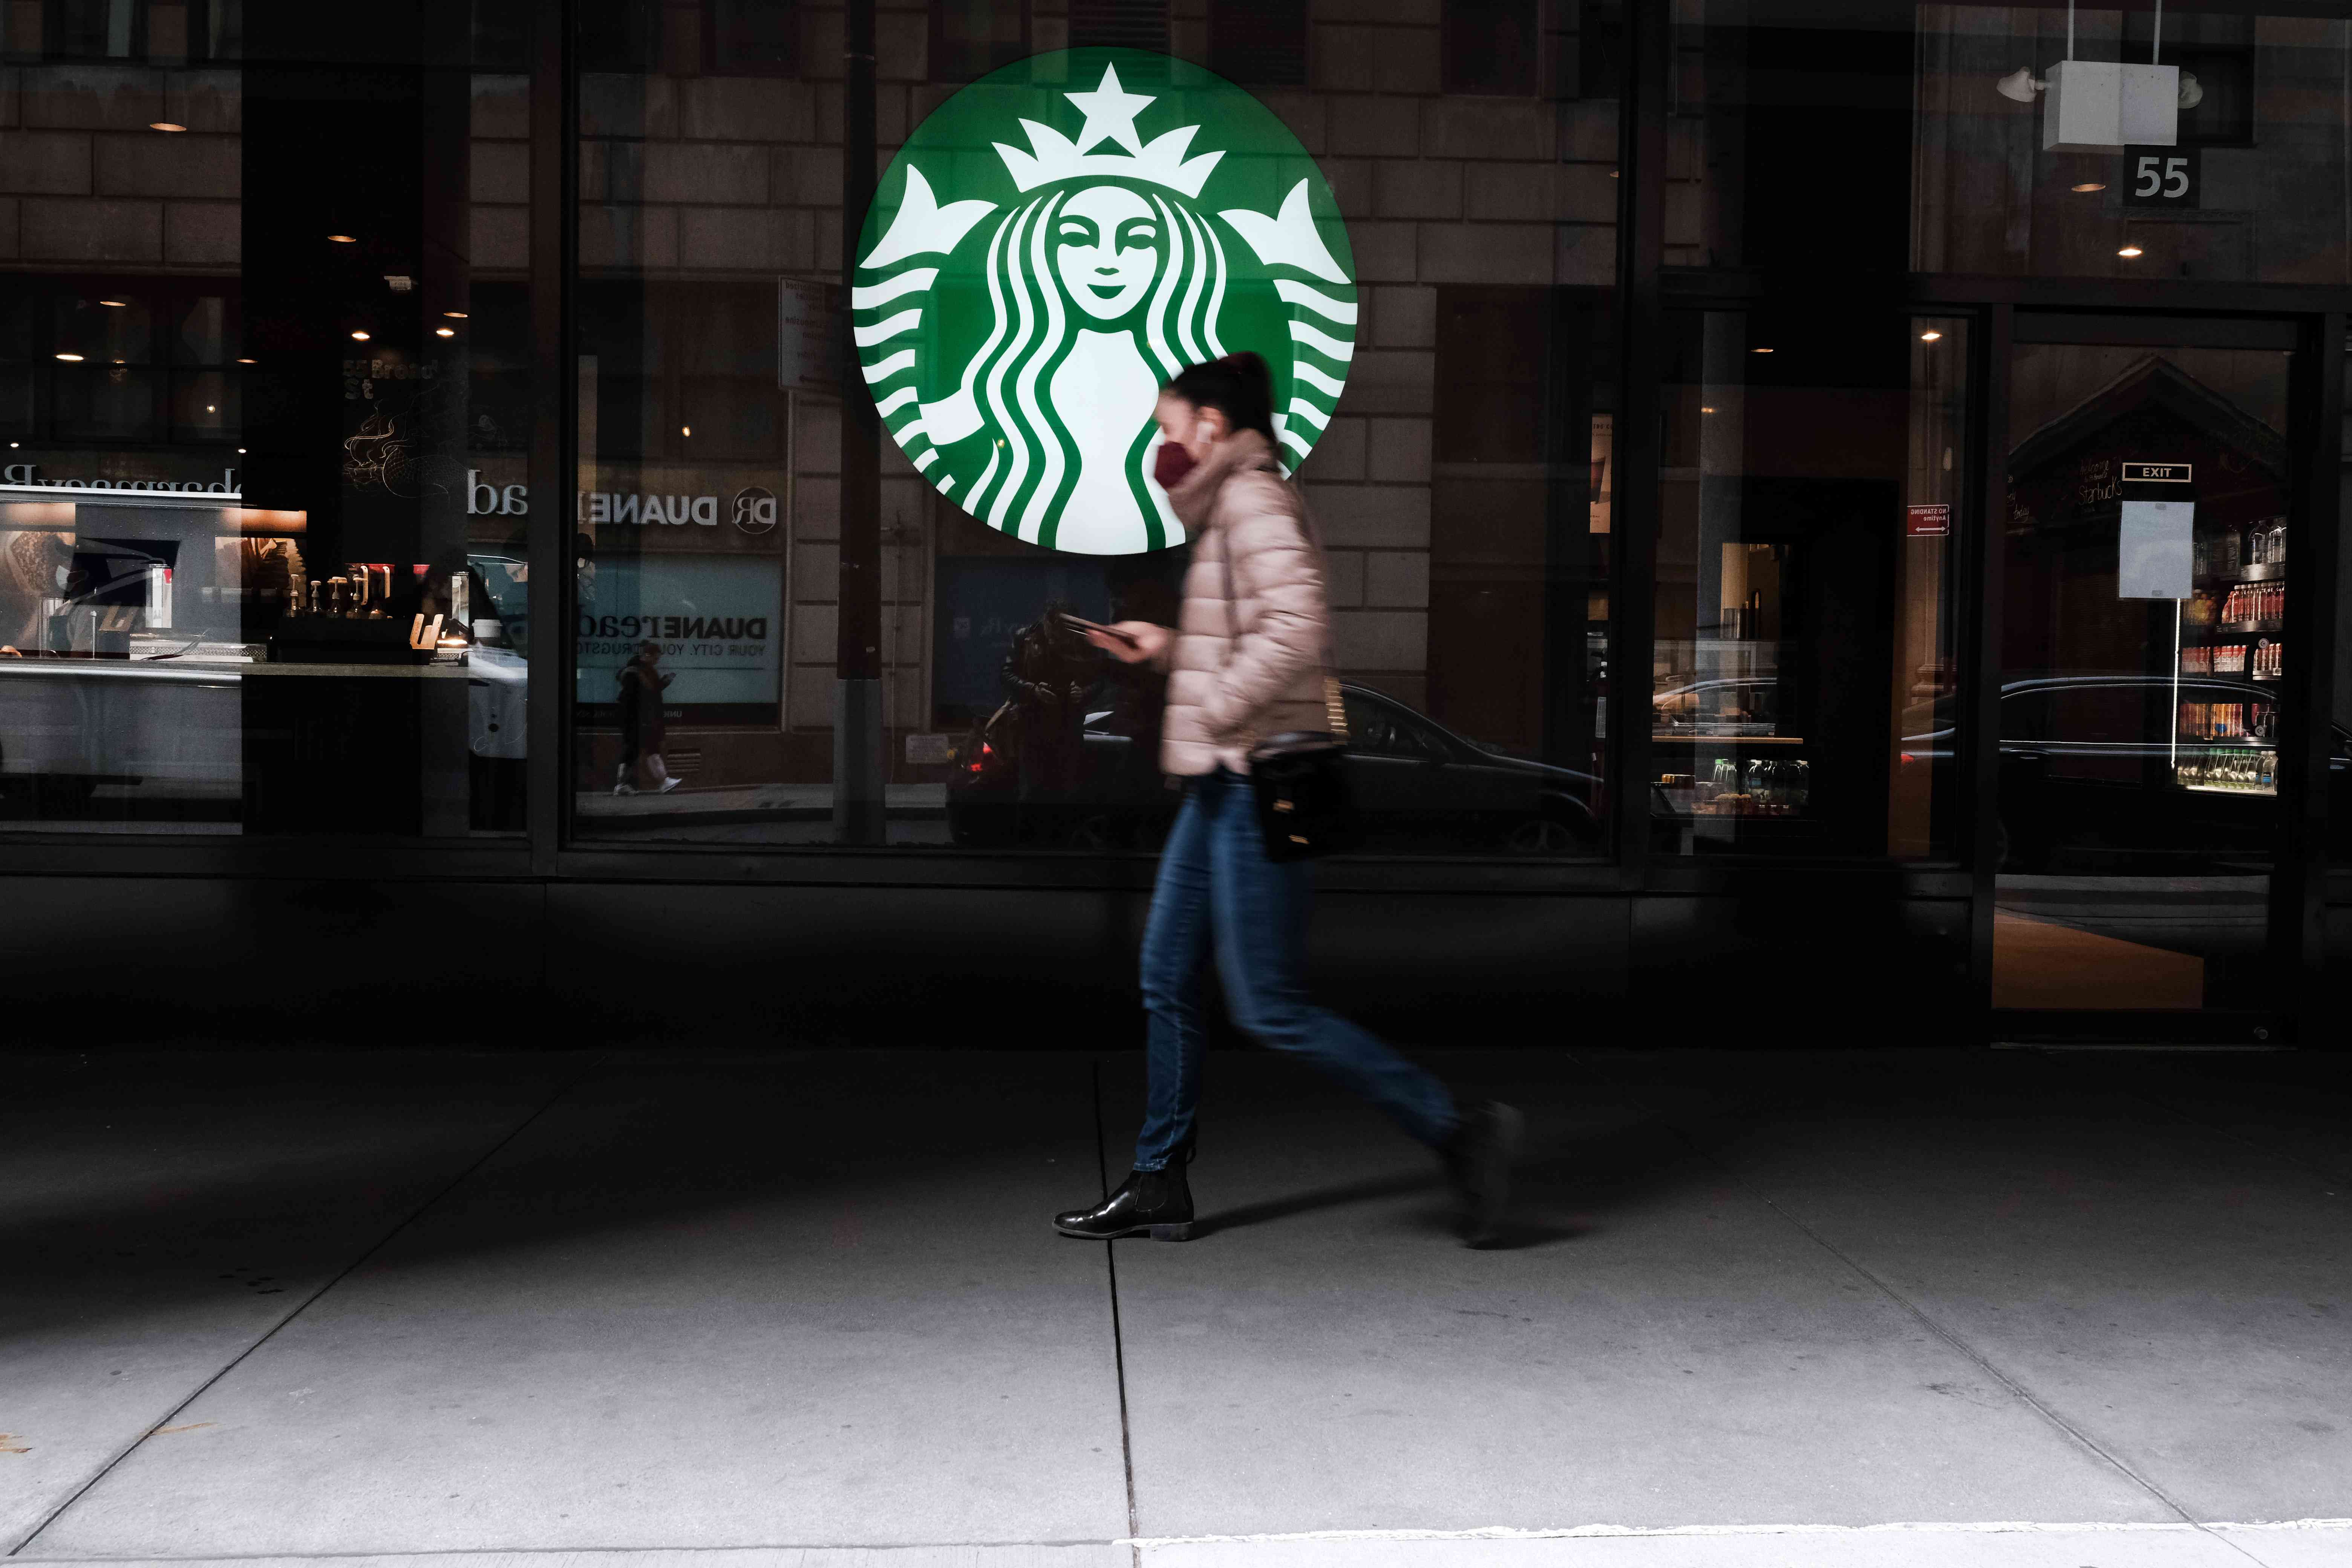 A woman walks by a Starbucks coffee shop in Manhattan on April 04, 2022 in New York City.